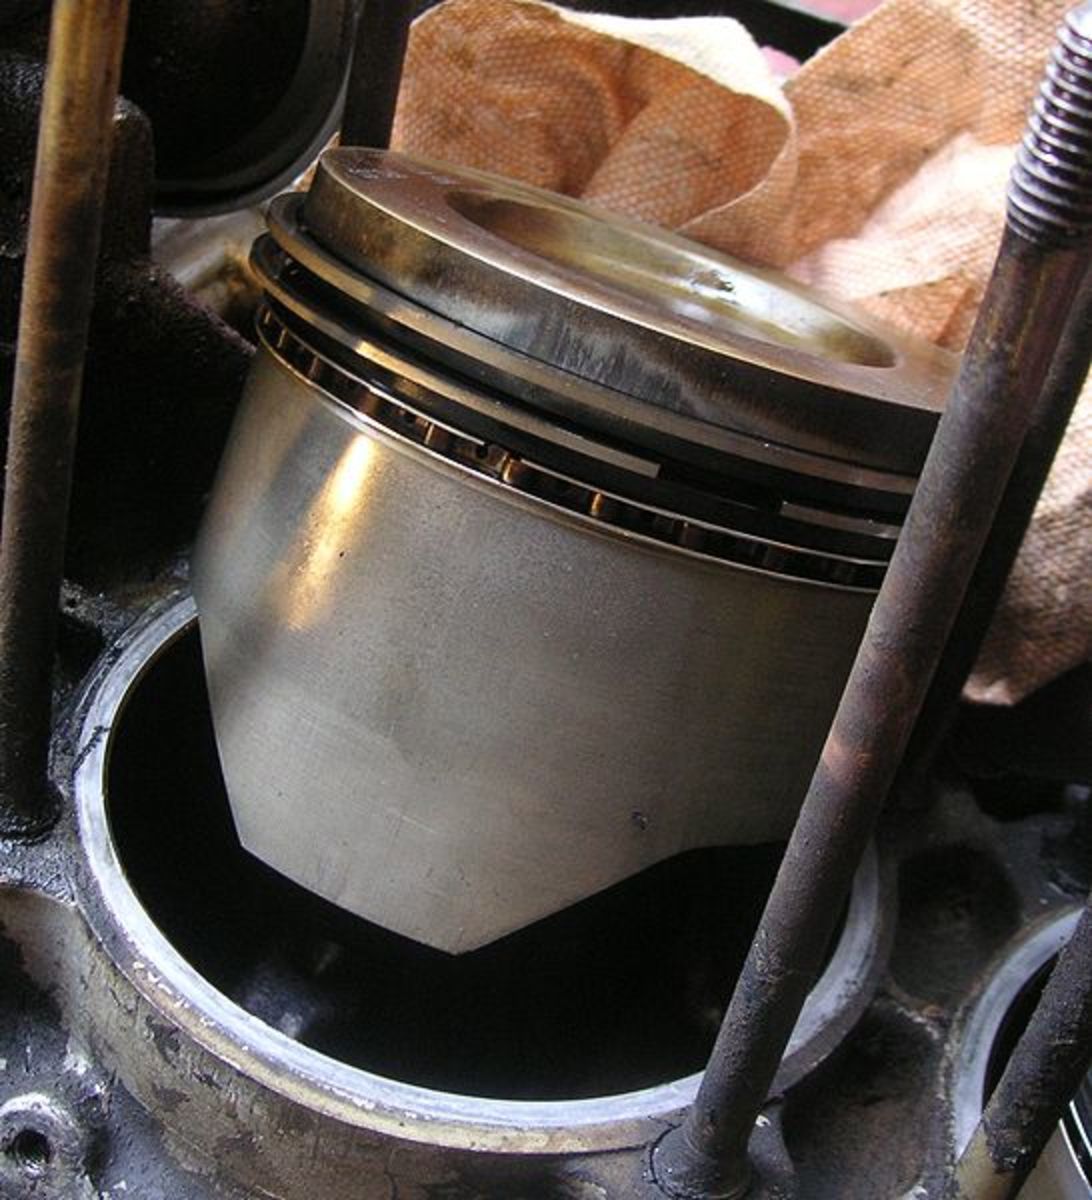 Engine mechanical problems can lead to random misfires as well.